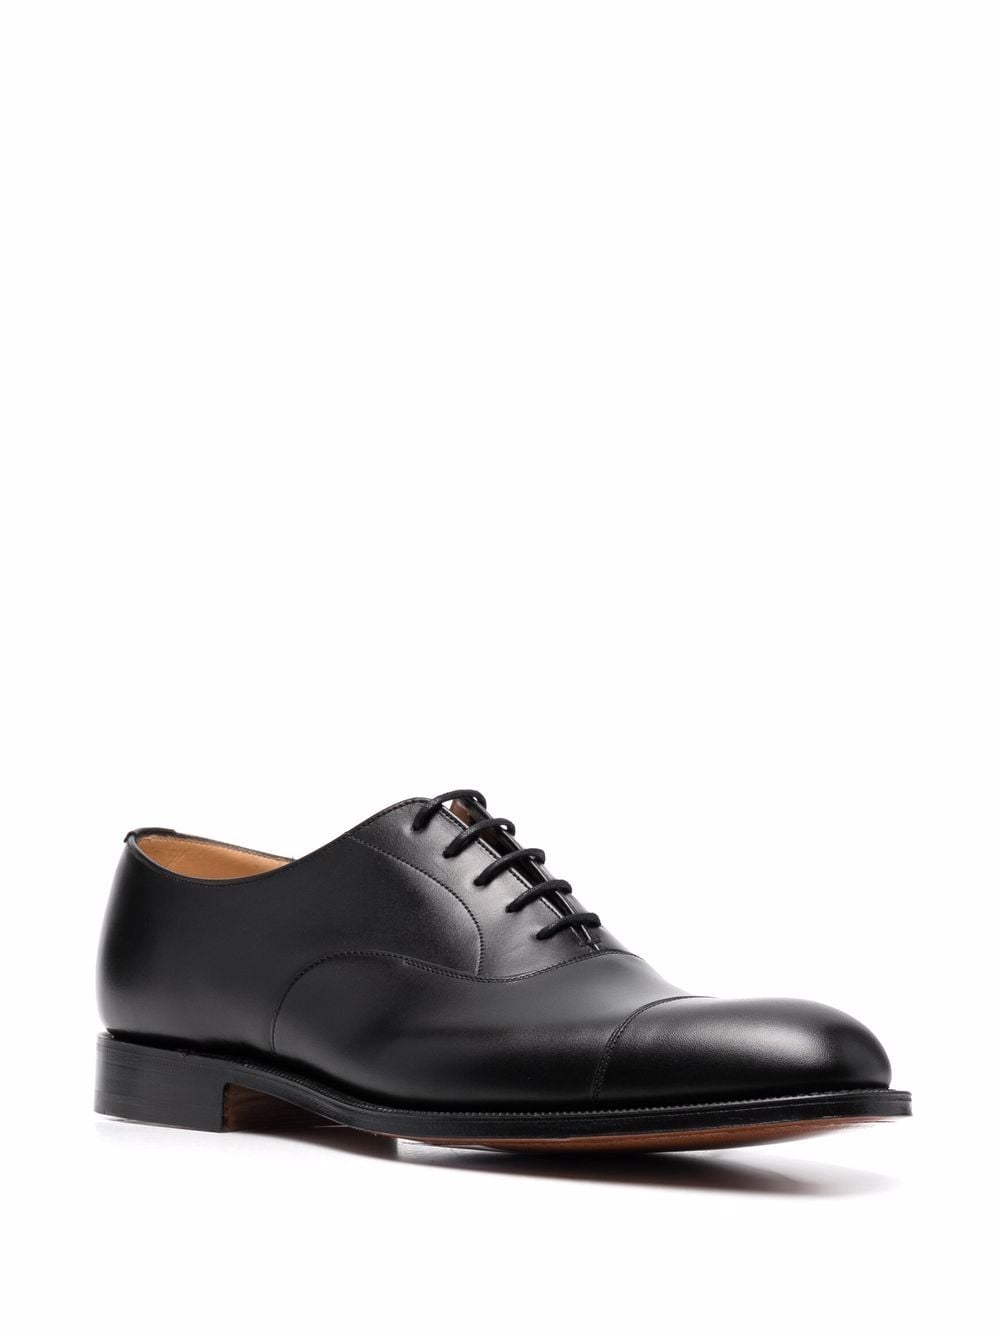 Image 2 of Church's Consul 1945 leather oxford shoes